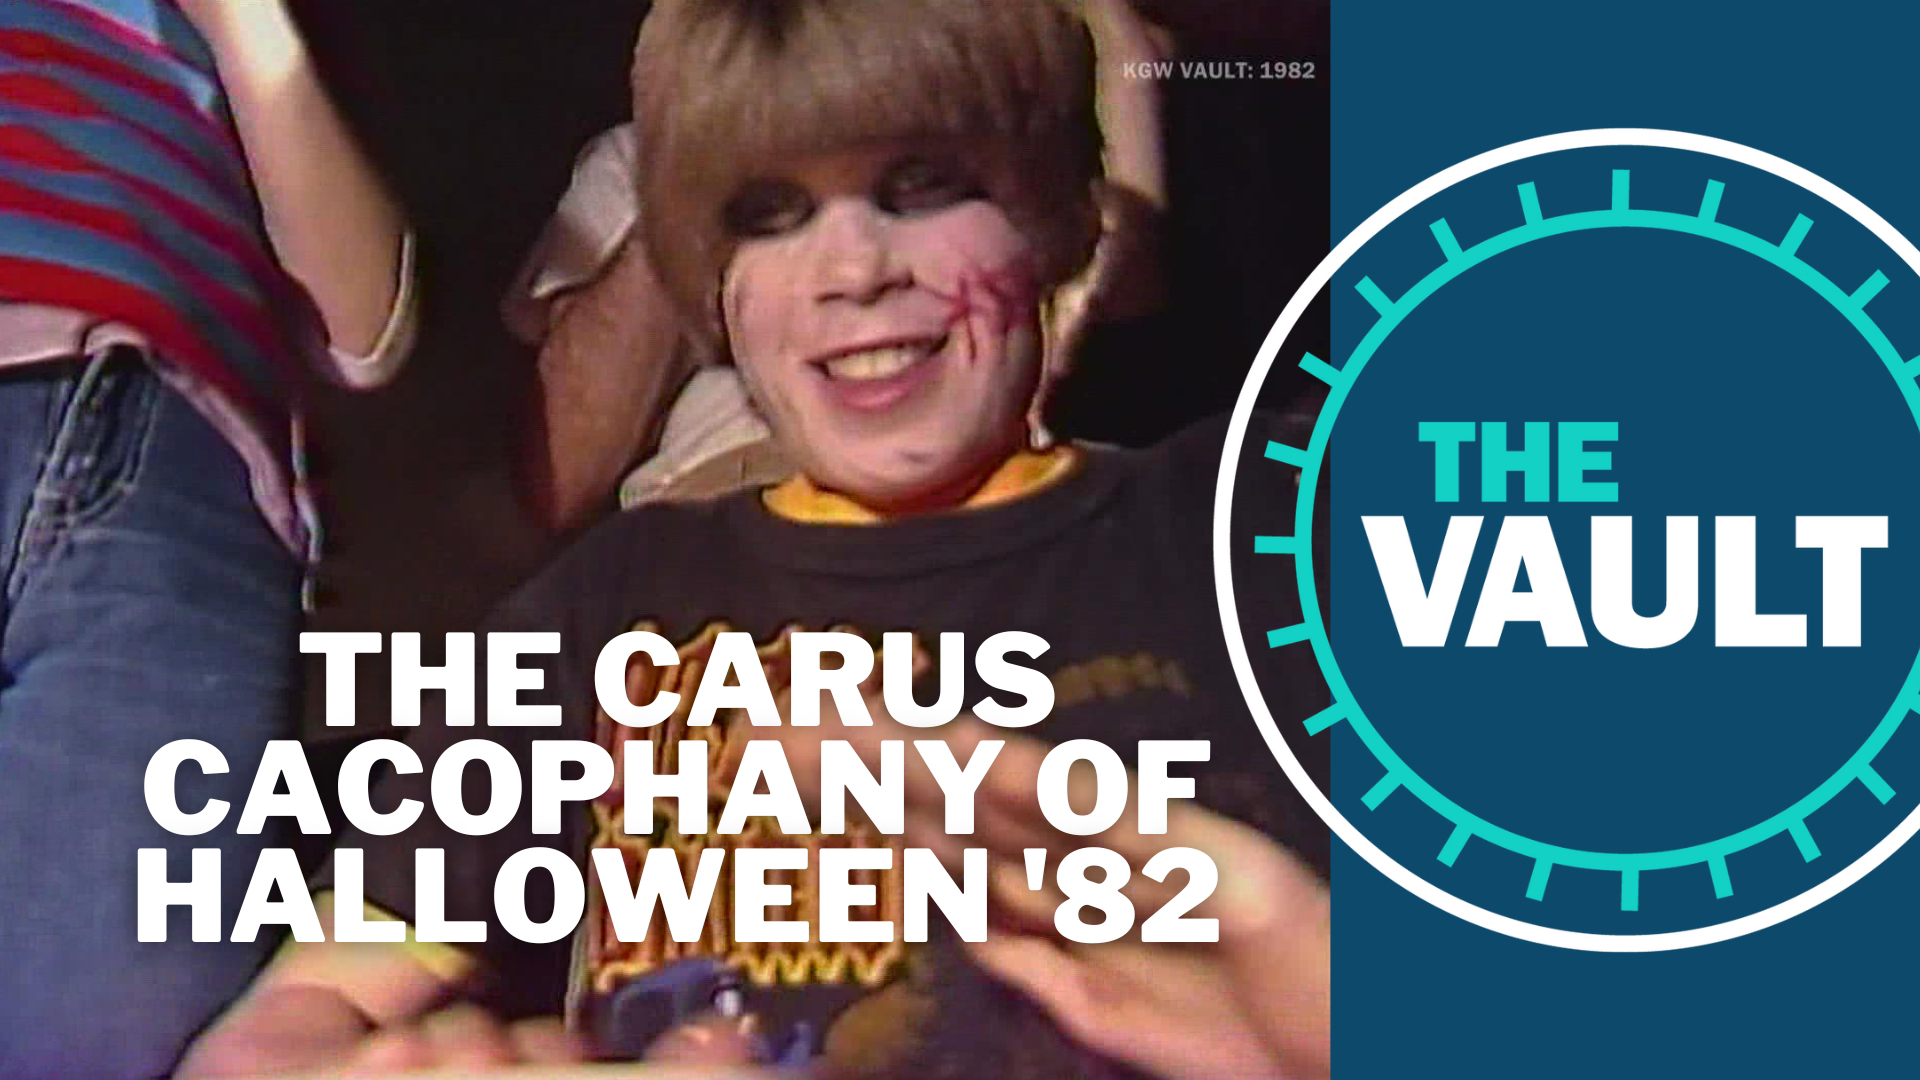 KGW has always had some fun on Halloween. Today we go back to 1982, to a story by Jon Tuttle and featuring some kids in Carus, Ore.